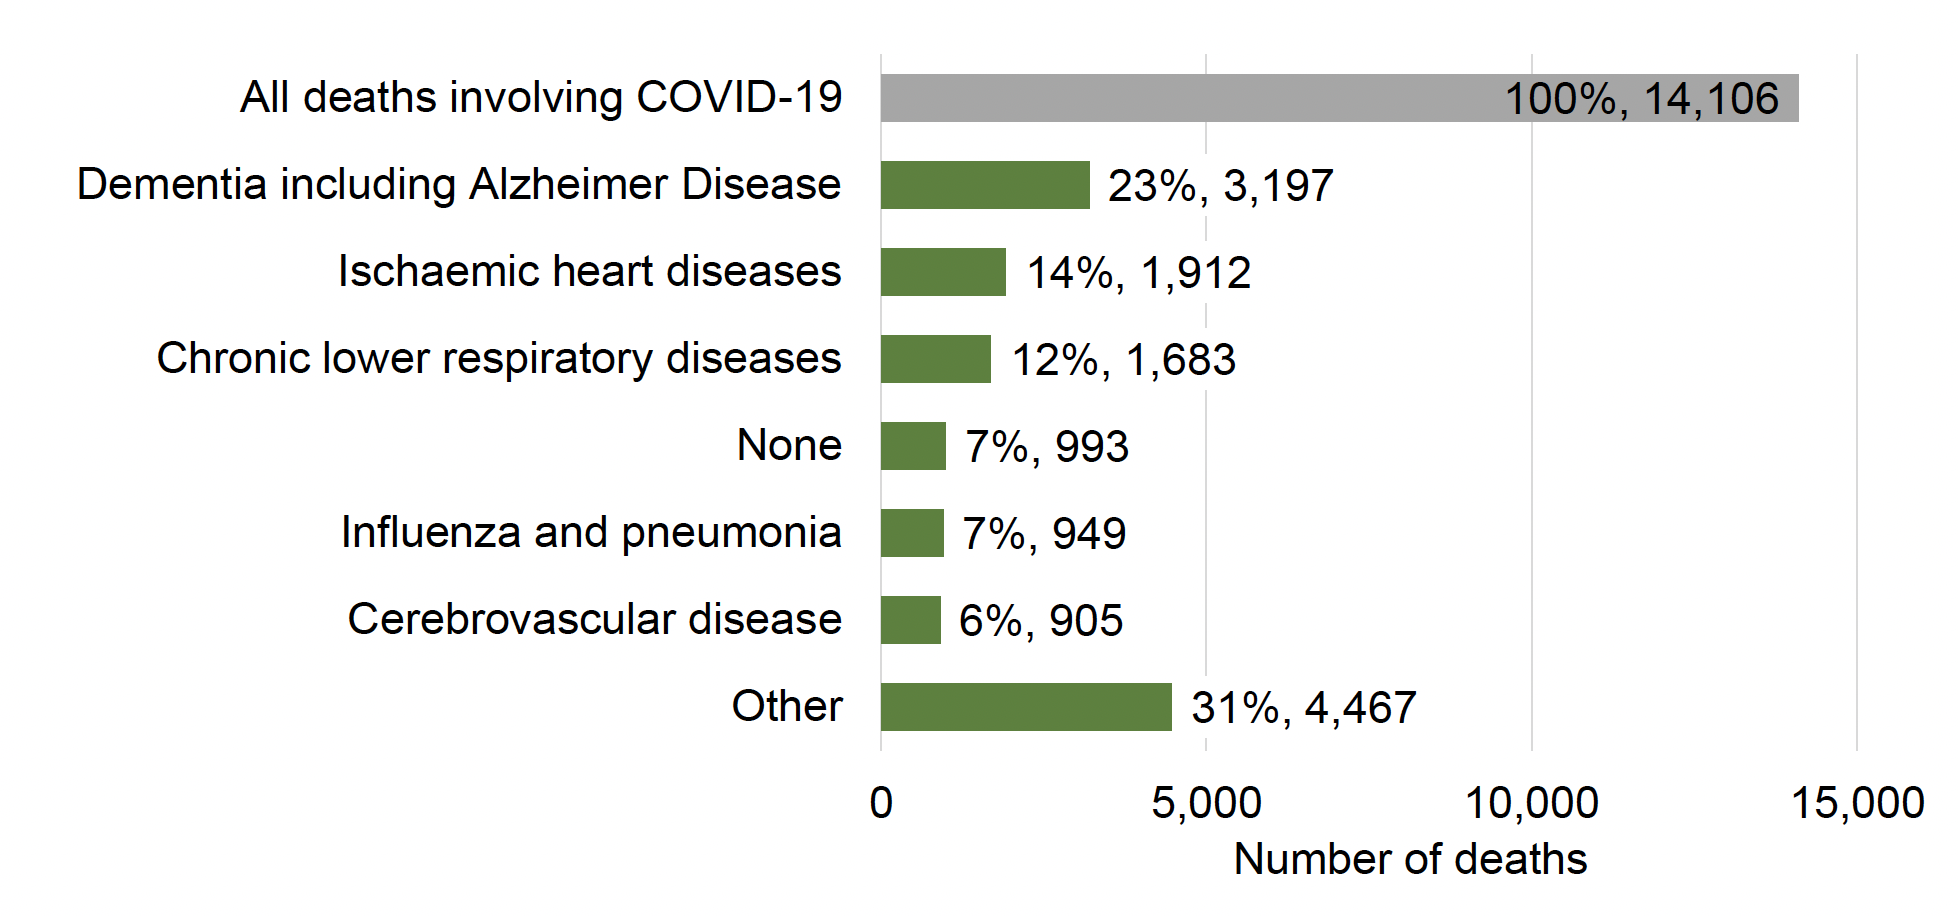 Figure 1: Bar chart displaying the main pre-existing medical conditions of deaths involving COVID-19 between 1 March 2020 and 31 March 2022; the main pre-existing medical conditions are Dementia including Alzheimer’s disease, Ischaemic heart diseases, and Chronic lower respiratory diseases.